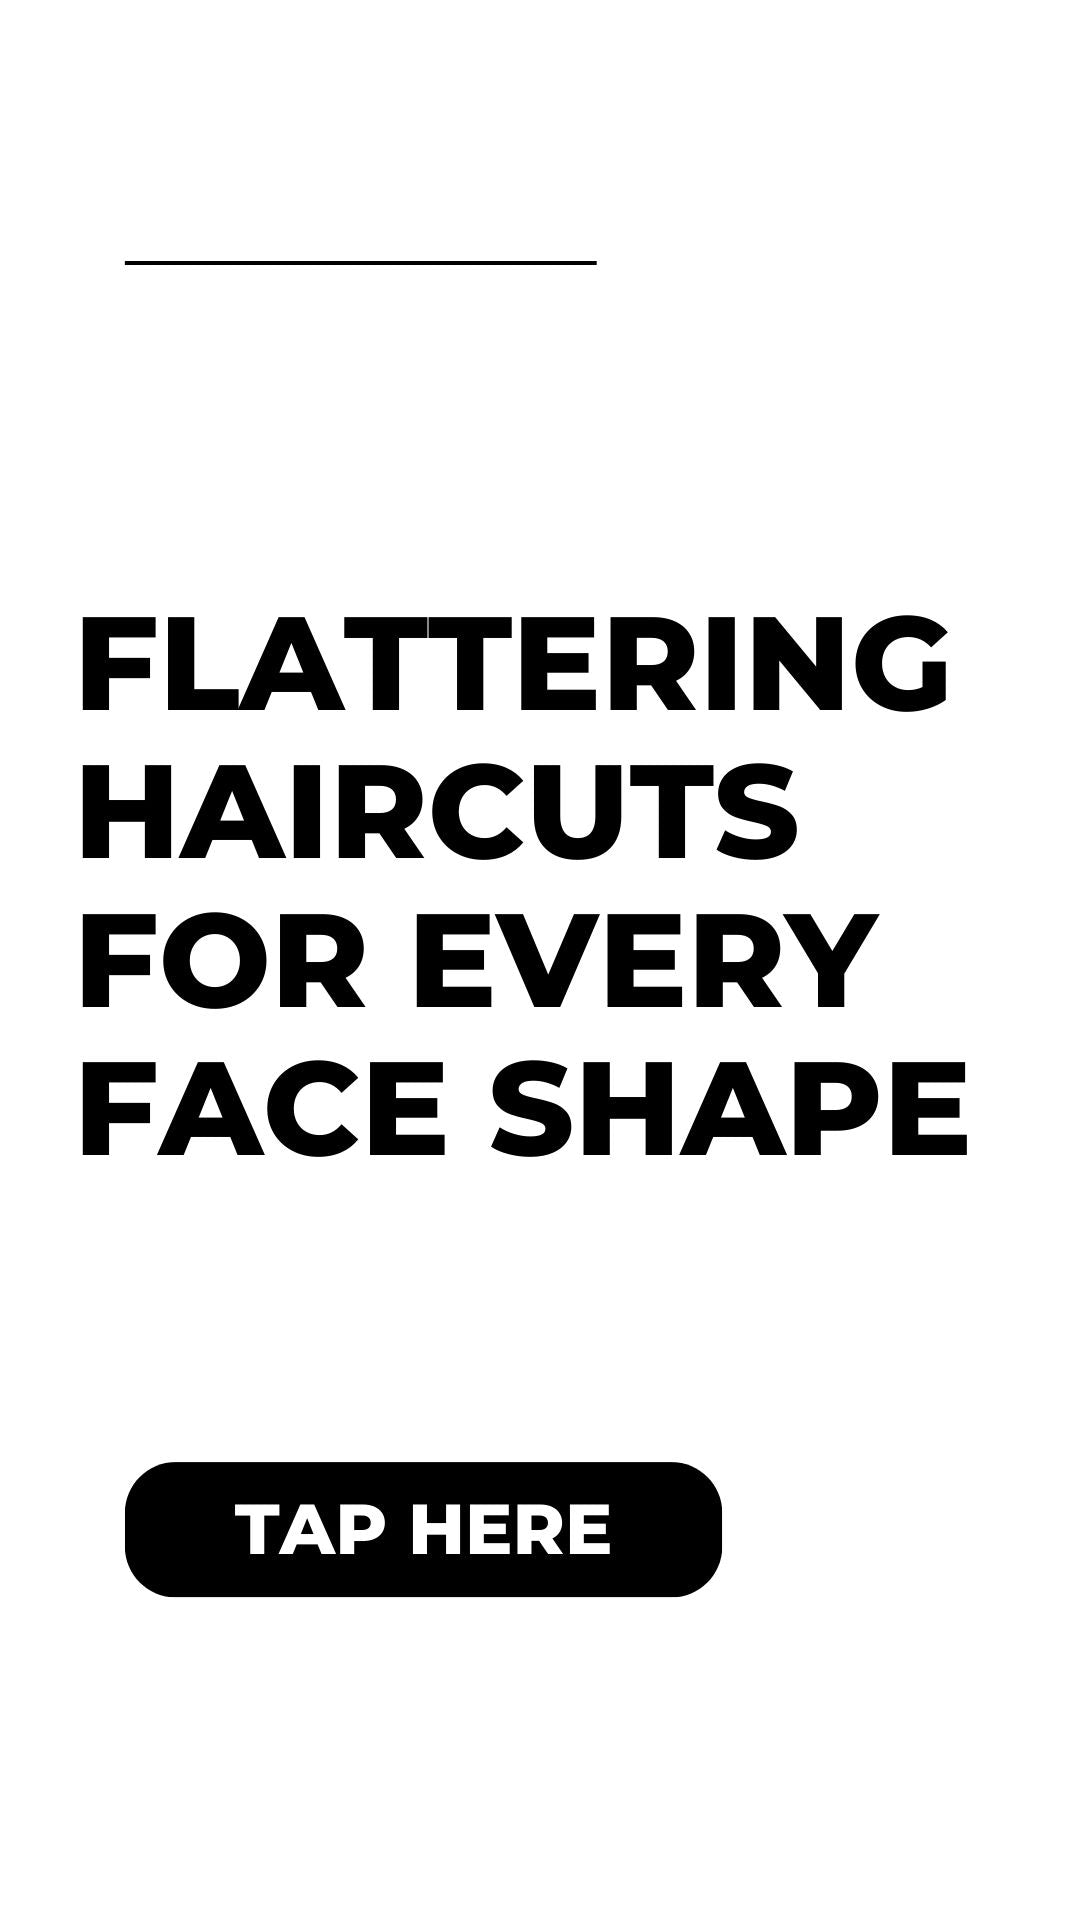 Flattering Haircuts for Every Face Shape